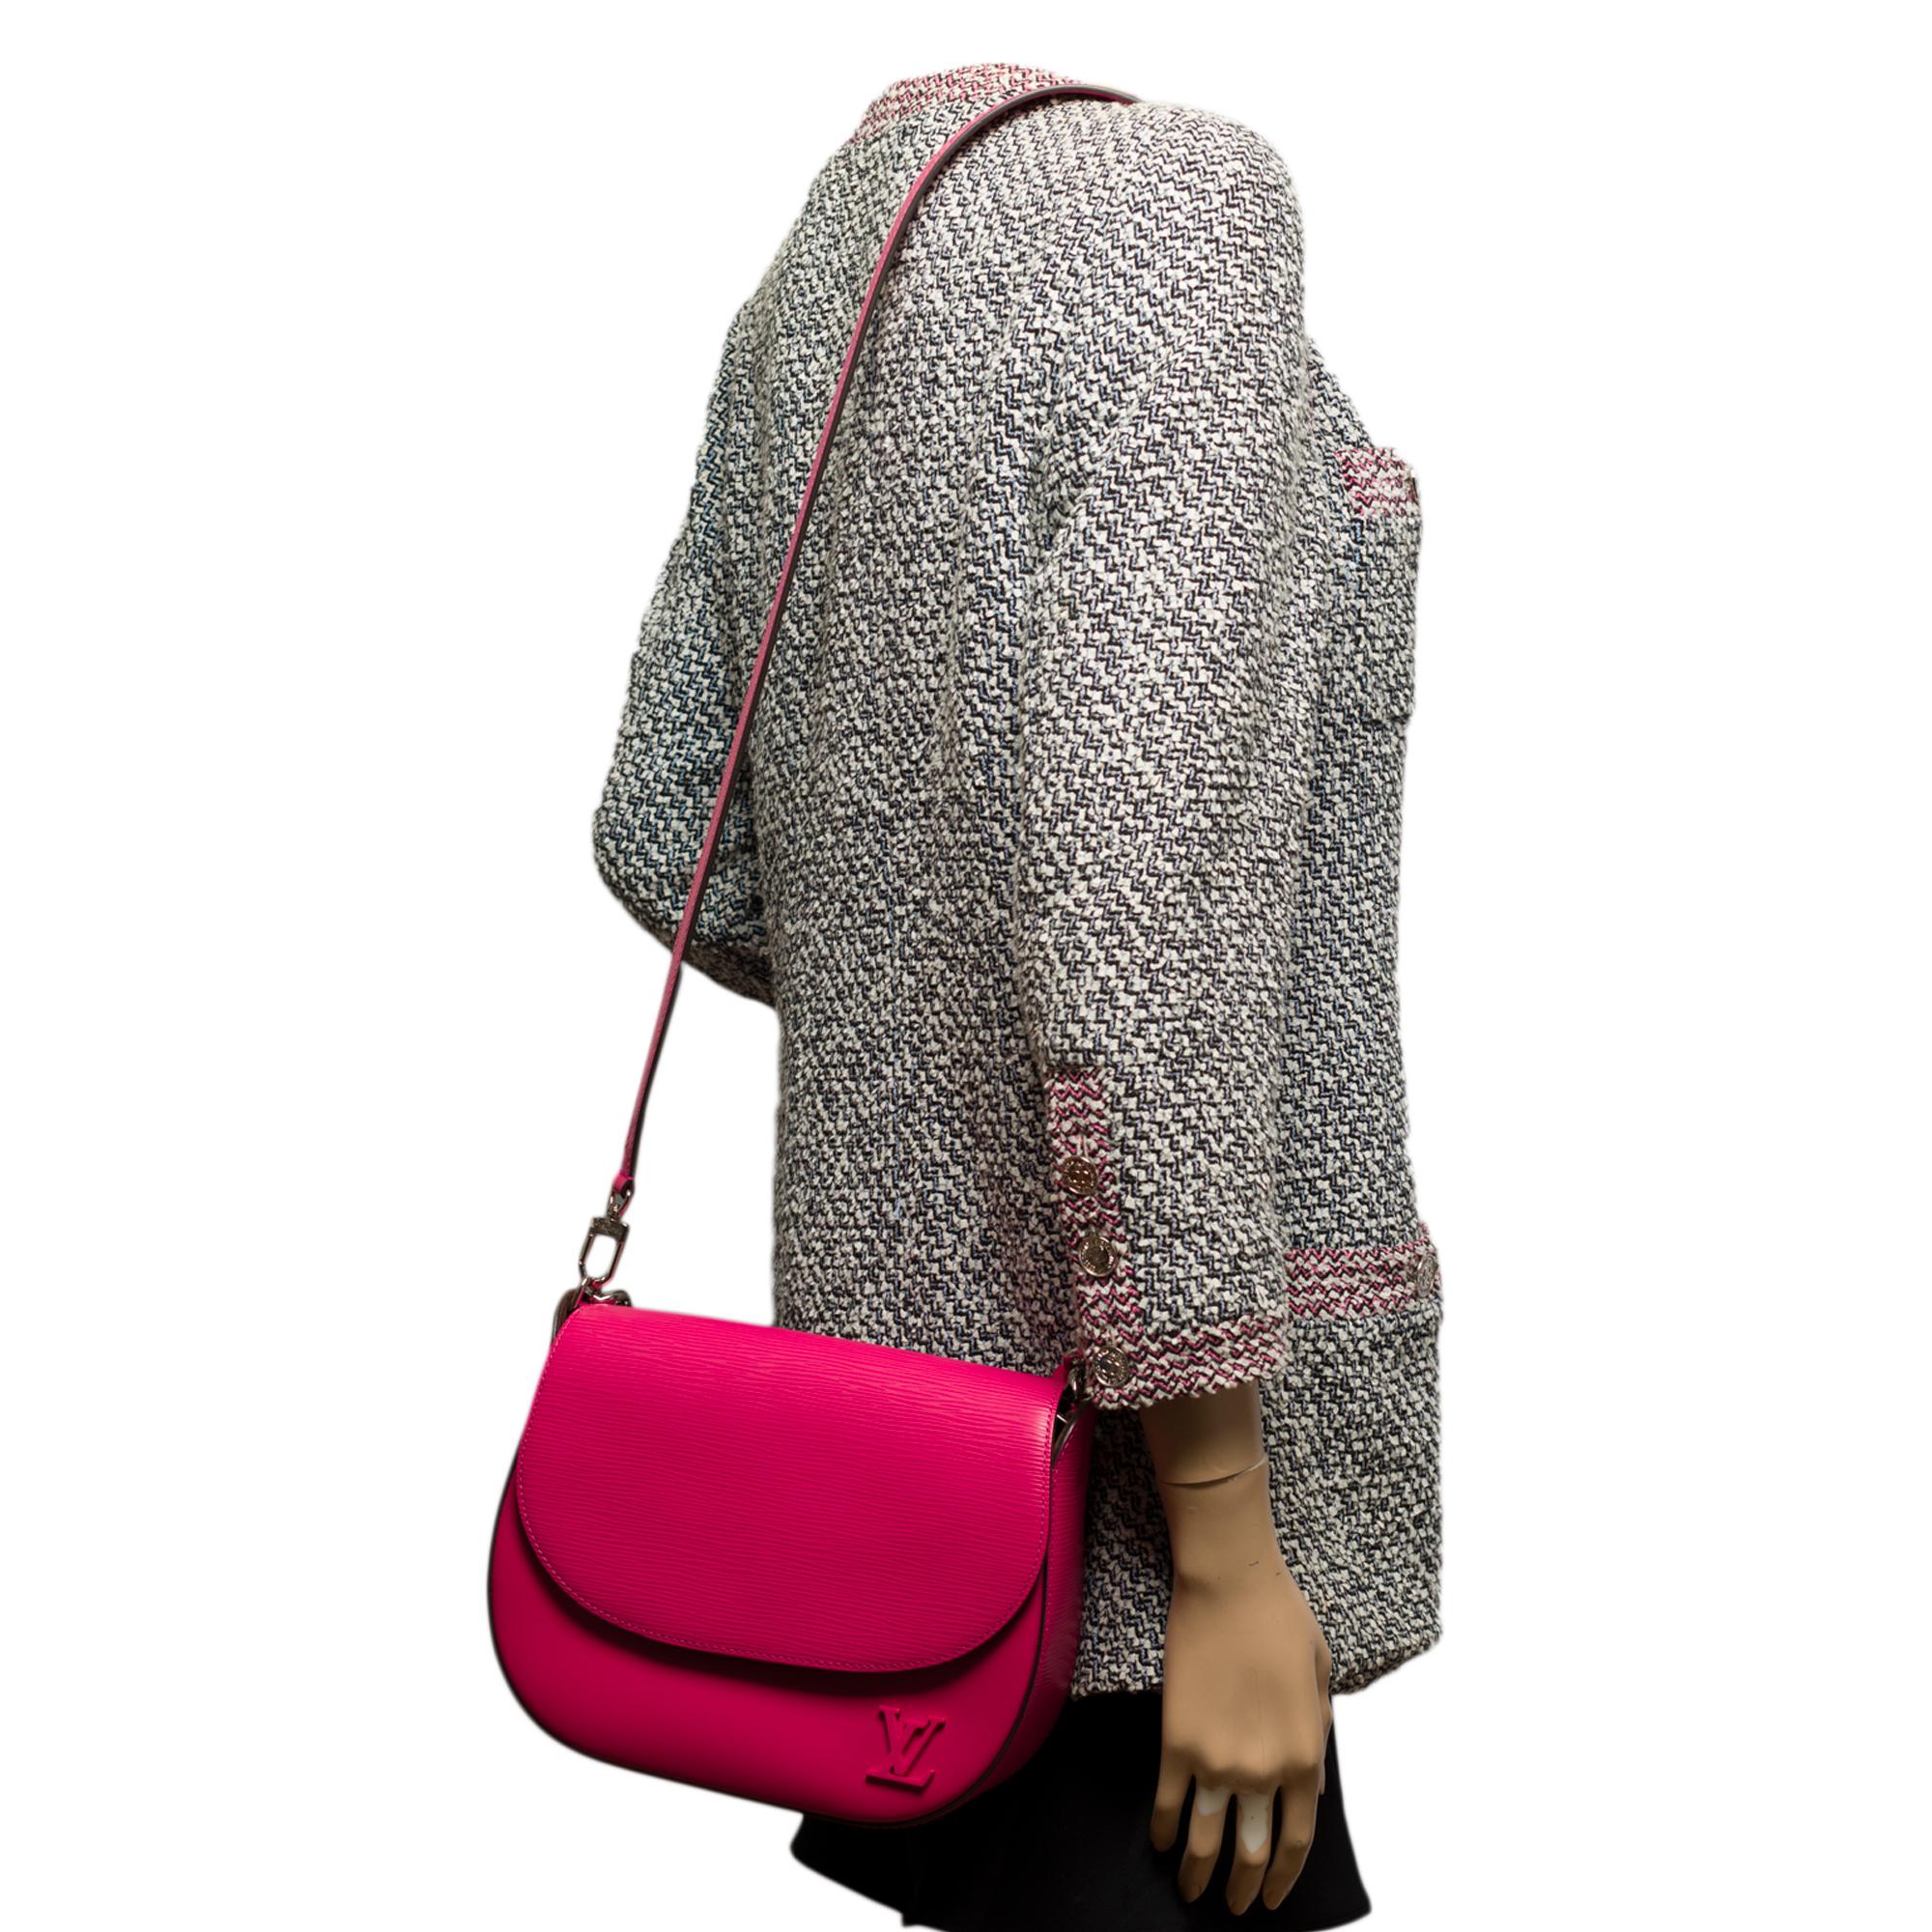 Very Chic Louis Vuitton Luna shoulder bag in Pink epi leather leather, SHW 9